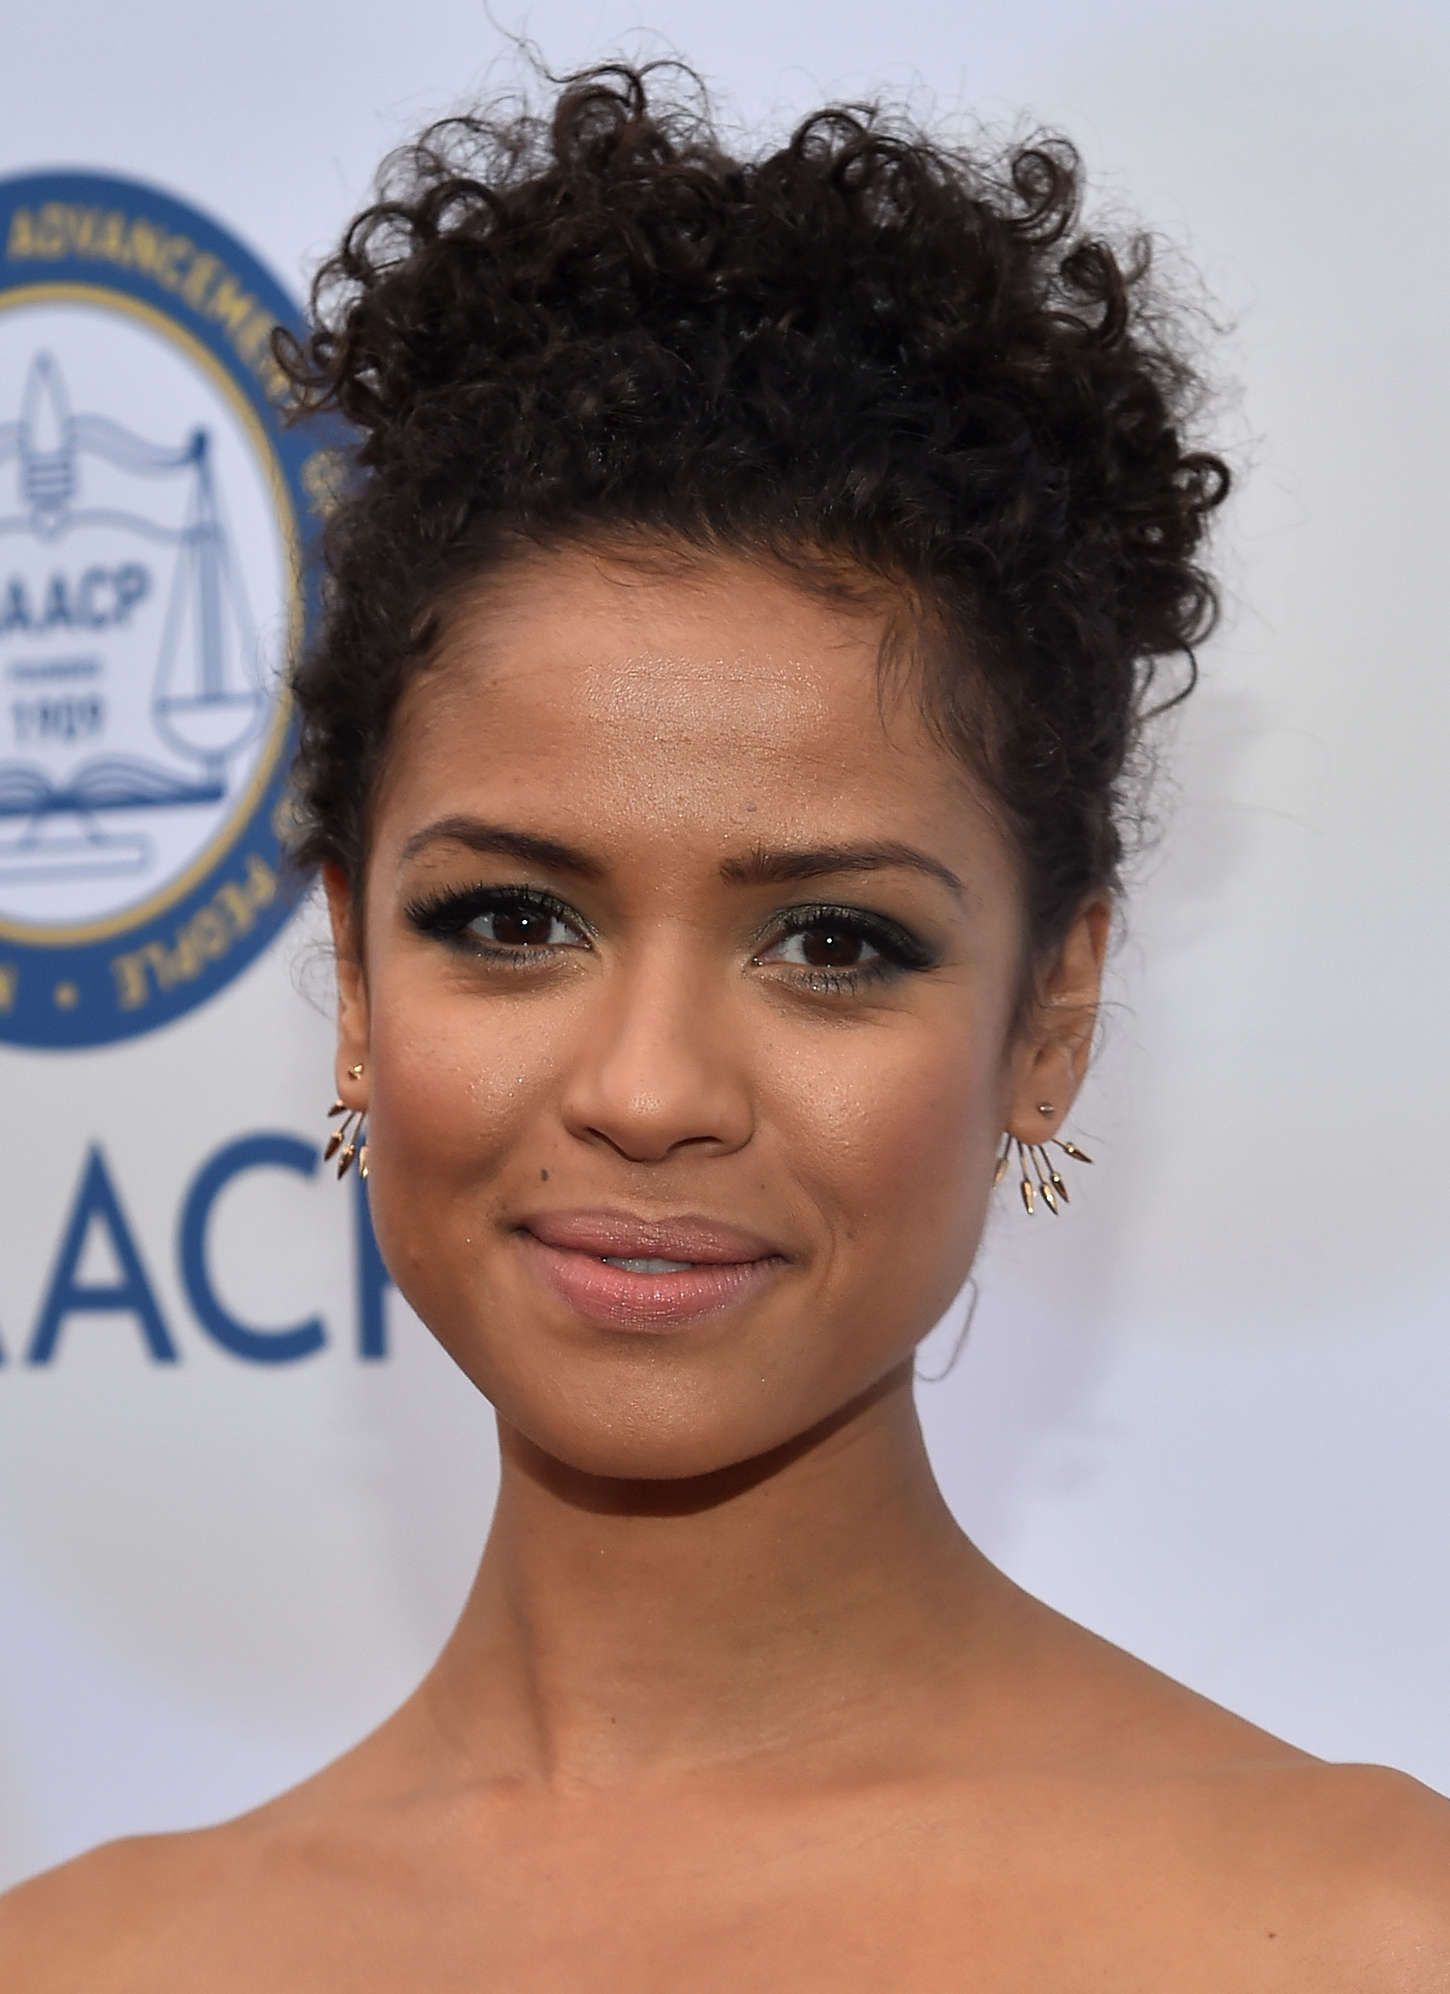 Pictures of Gugu Mbatha-Raw